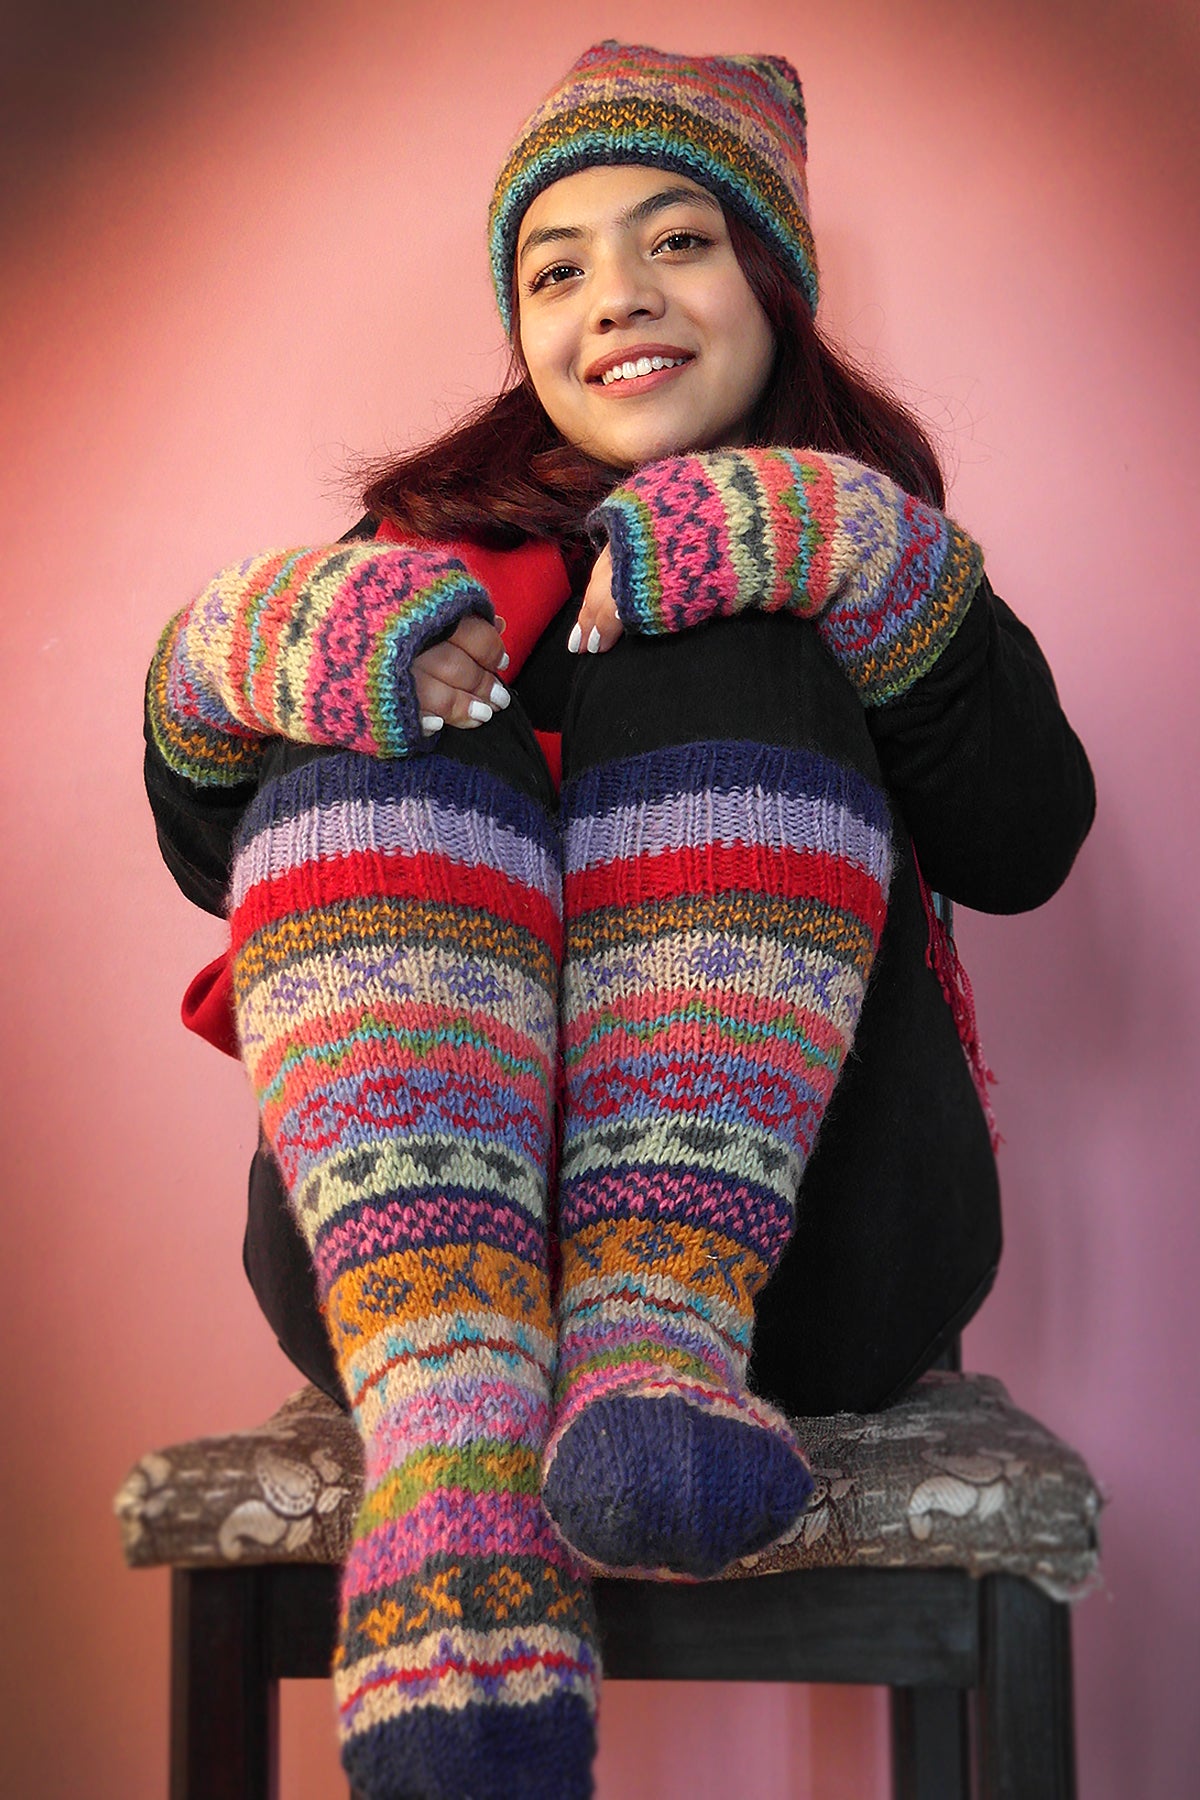 Blue pink and green mixed color Woolen Knee High Socks